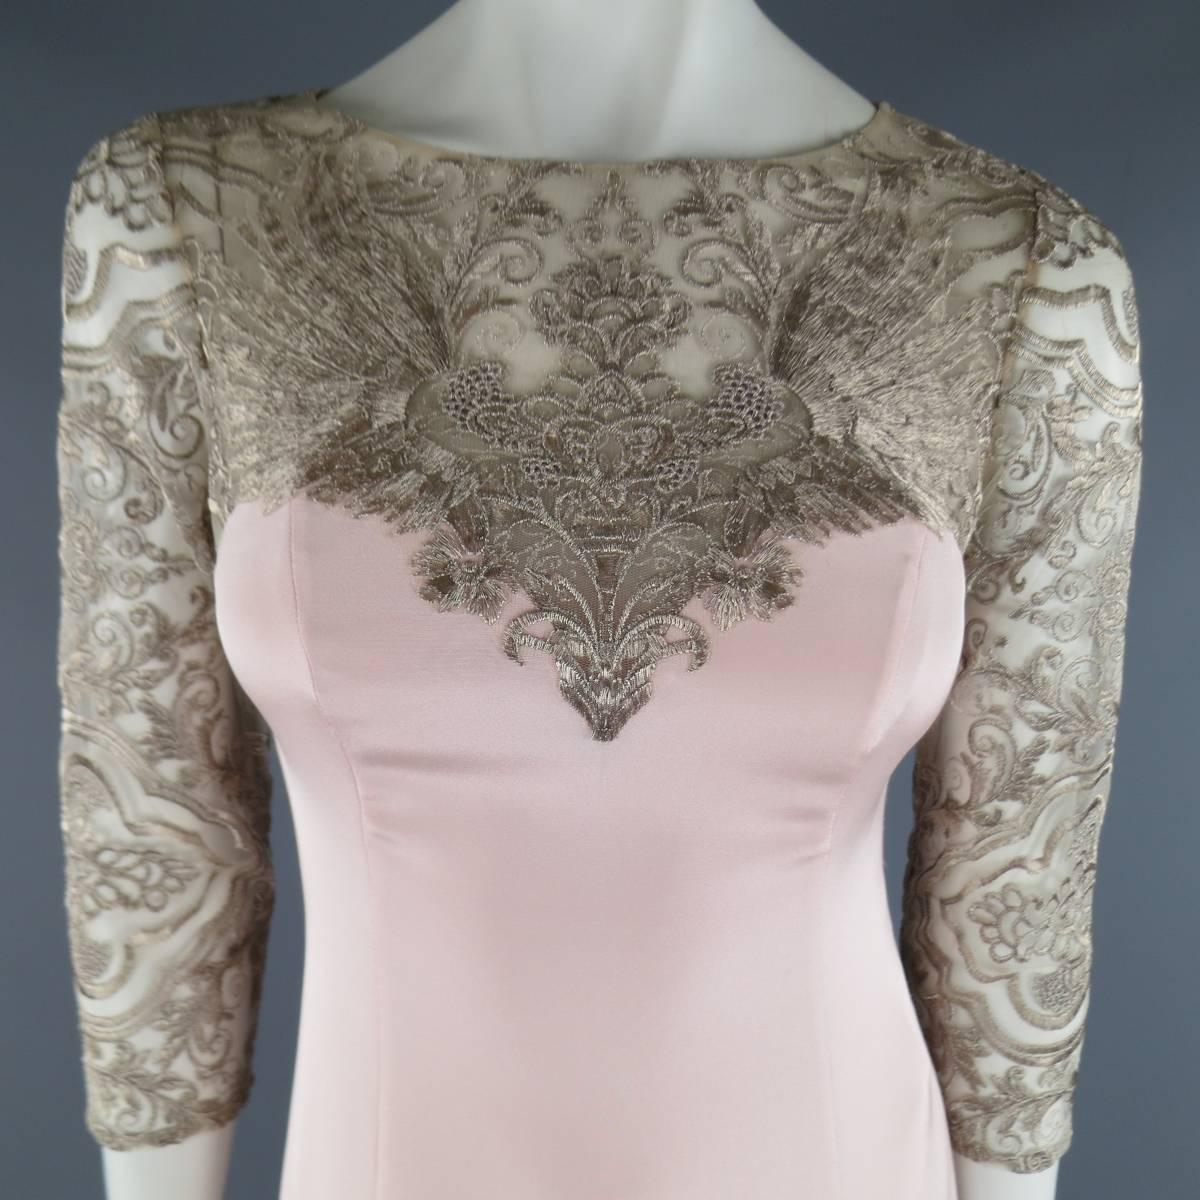 MARCHESA NOTTE evening gown in a lovely rose pink stretch silk featuring a metallic rose gold embroidered lace top with crew neck, three quarter sleeves, sweetheart neckline, fitted body, and long skirt with slit.
 
New with Tags. Retails at